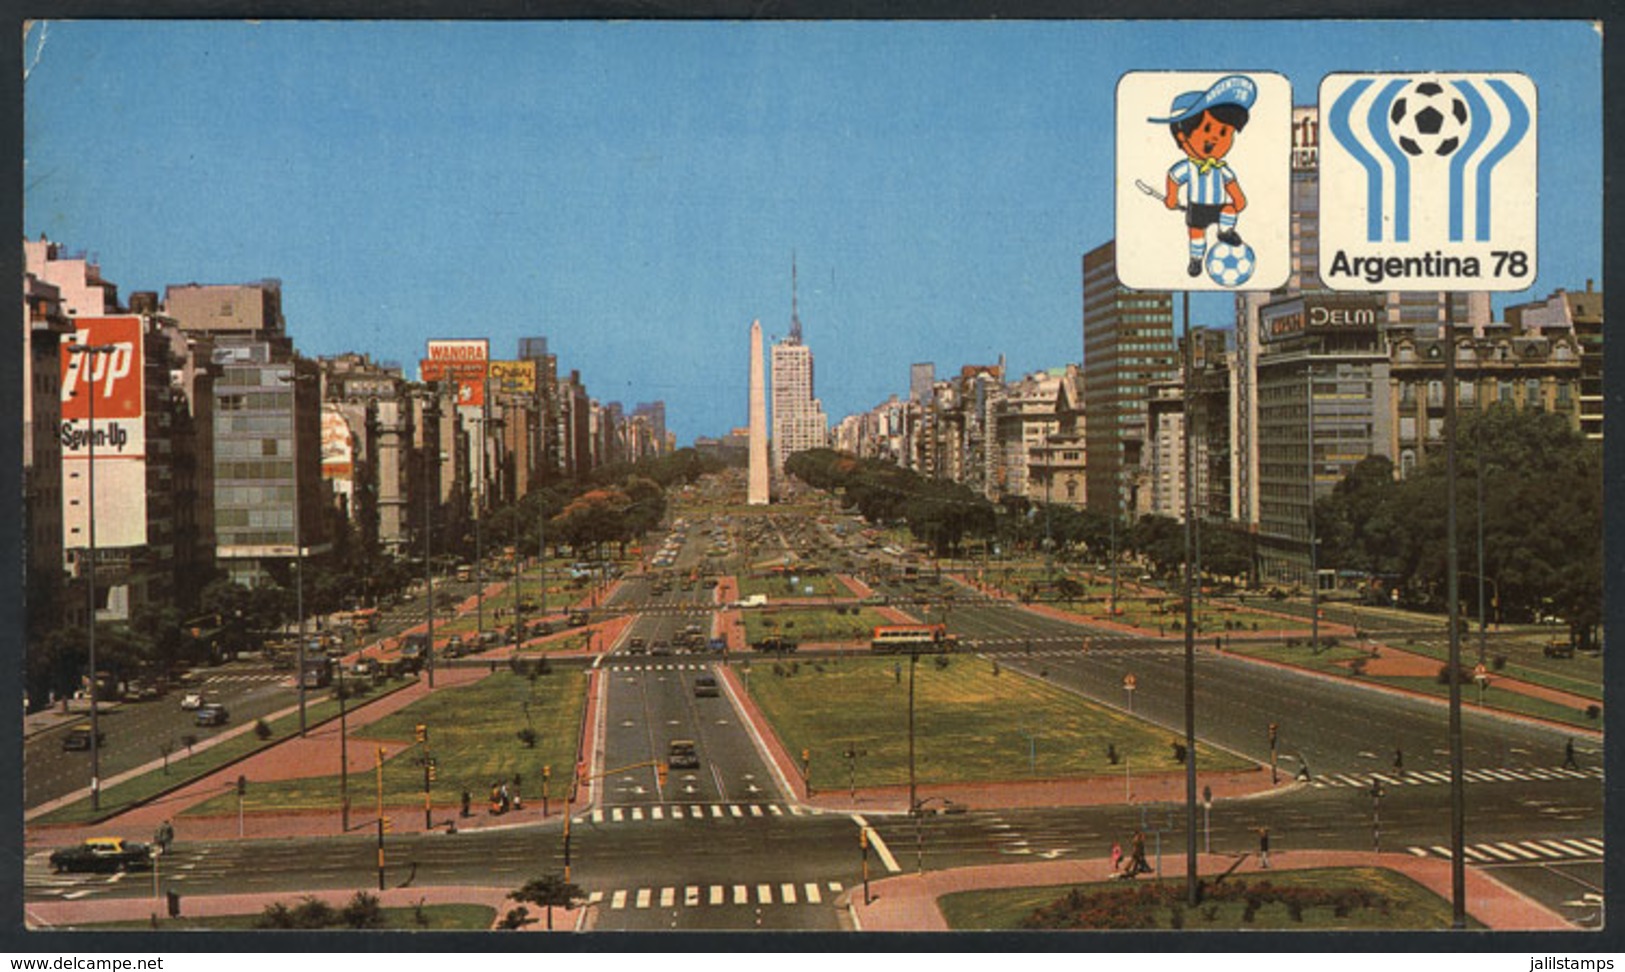 250 ARGENTINA: BUENOS AIRES: 9 De Julio Avenue, Argentina 78 Football World Cup, Used, VF - Argentine